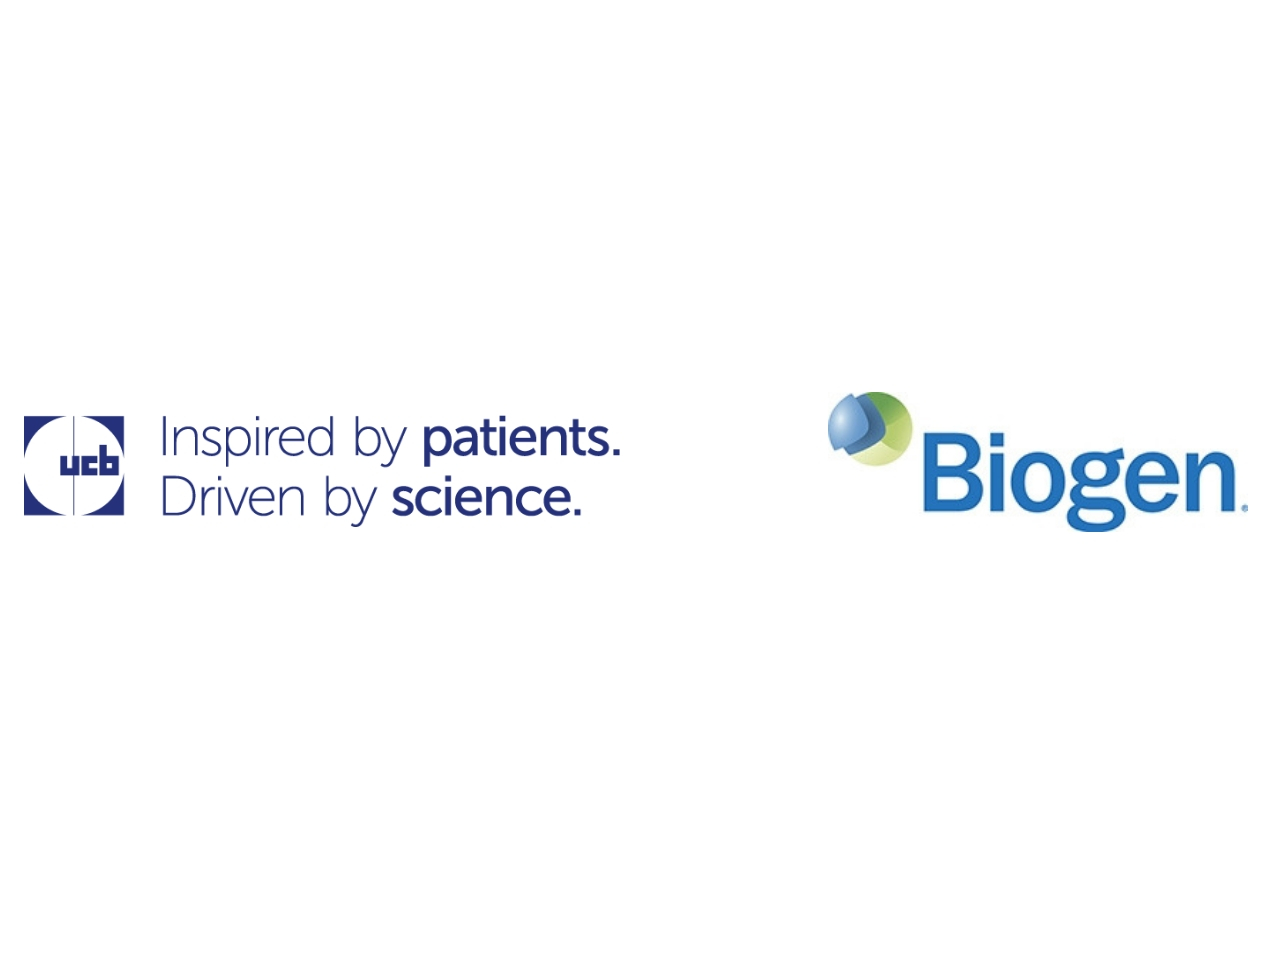 UCB_and_Biogen_logos_side_by_side_1280x960